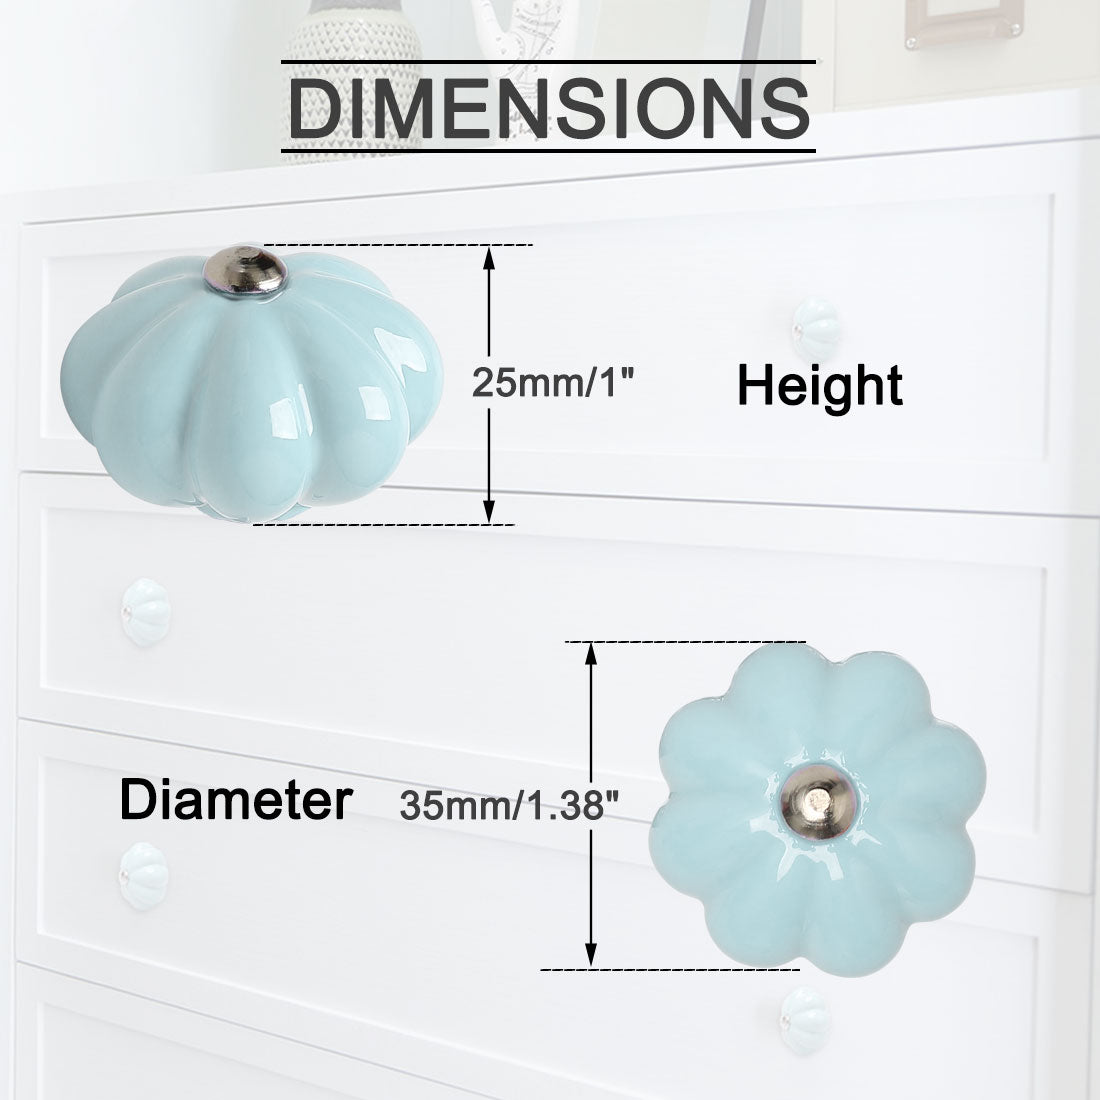 uxcell Uxcell Solid Ceramic Knobs Pumpkin Drawer Pull Handle Replacement Wardrobe 6pcs Blue